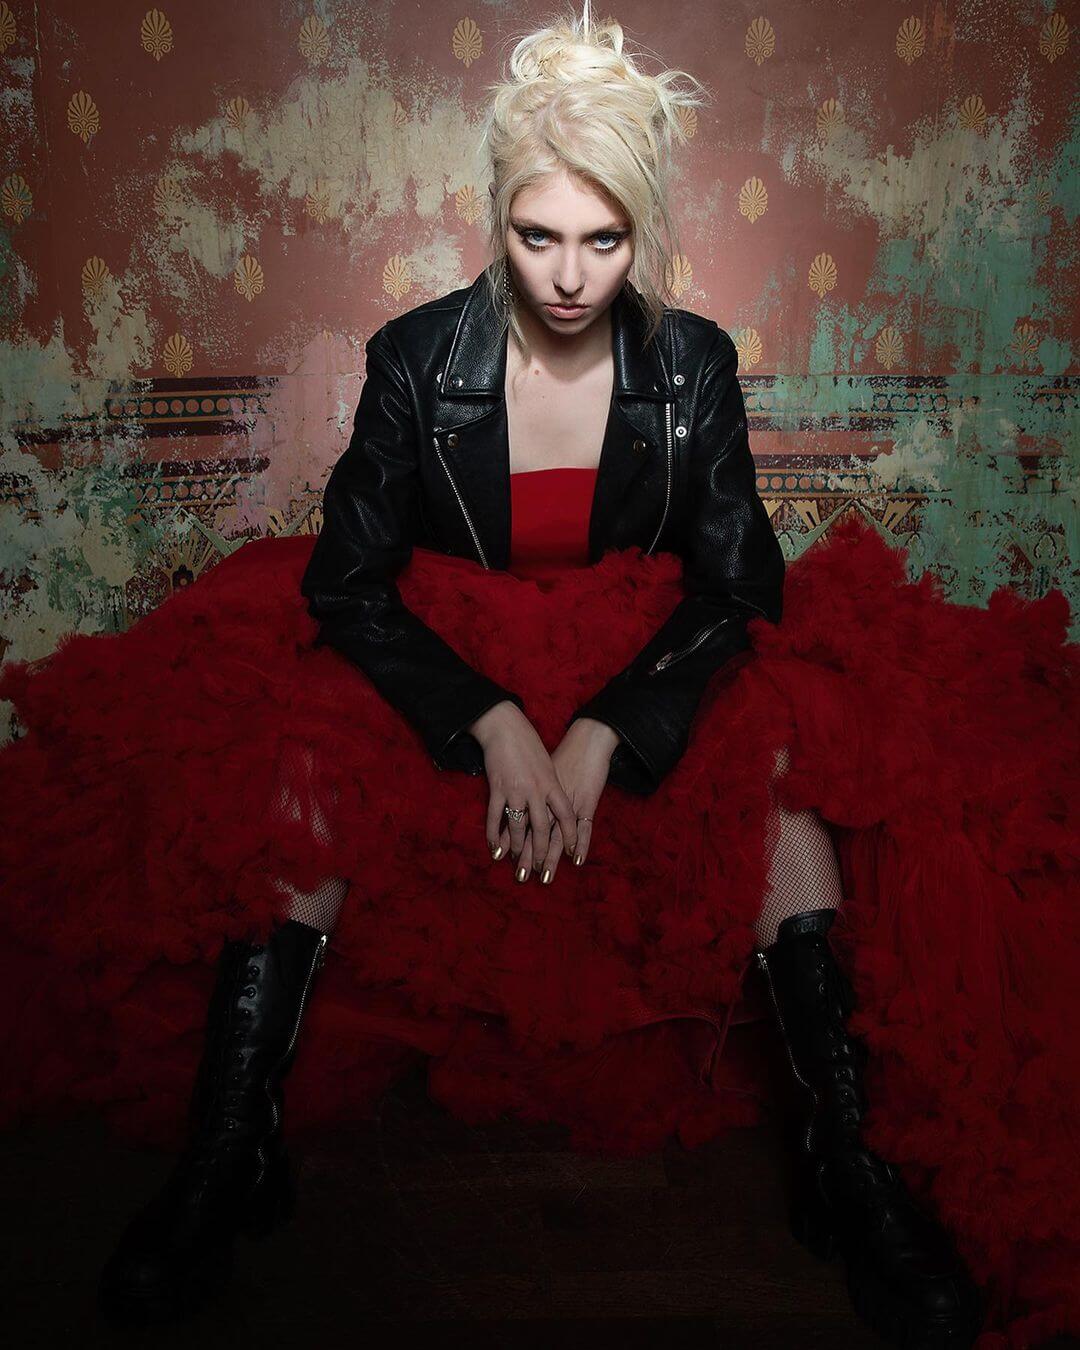 Taylor's enchanting look in a Red ruffled dress with a black jacket - Taylor Momsen